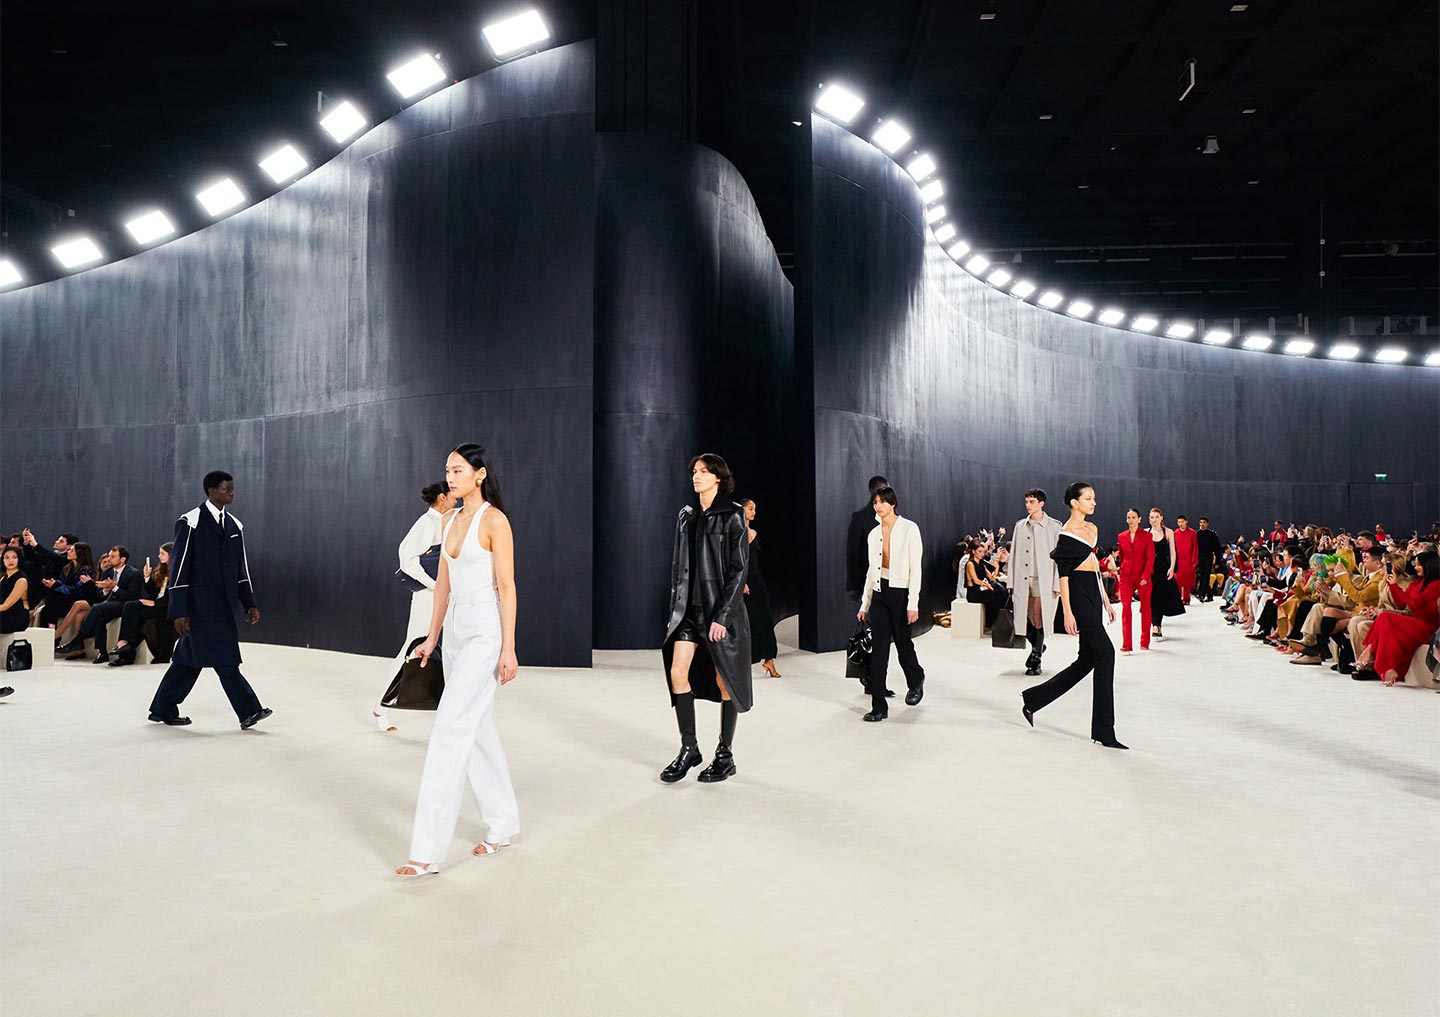 A moment from the second mainline Ferragamo show as imagined by creative director Maximilian Davis